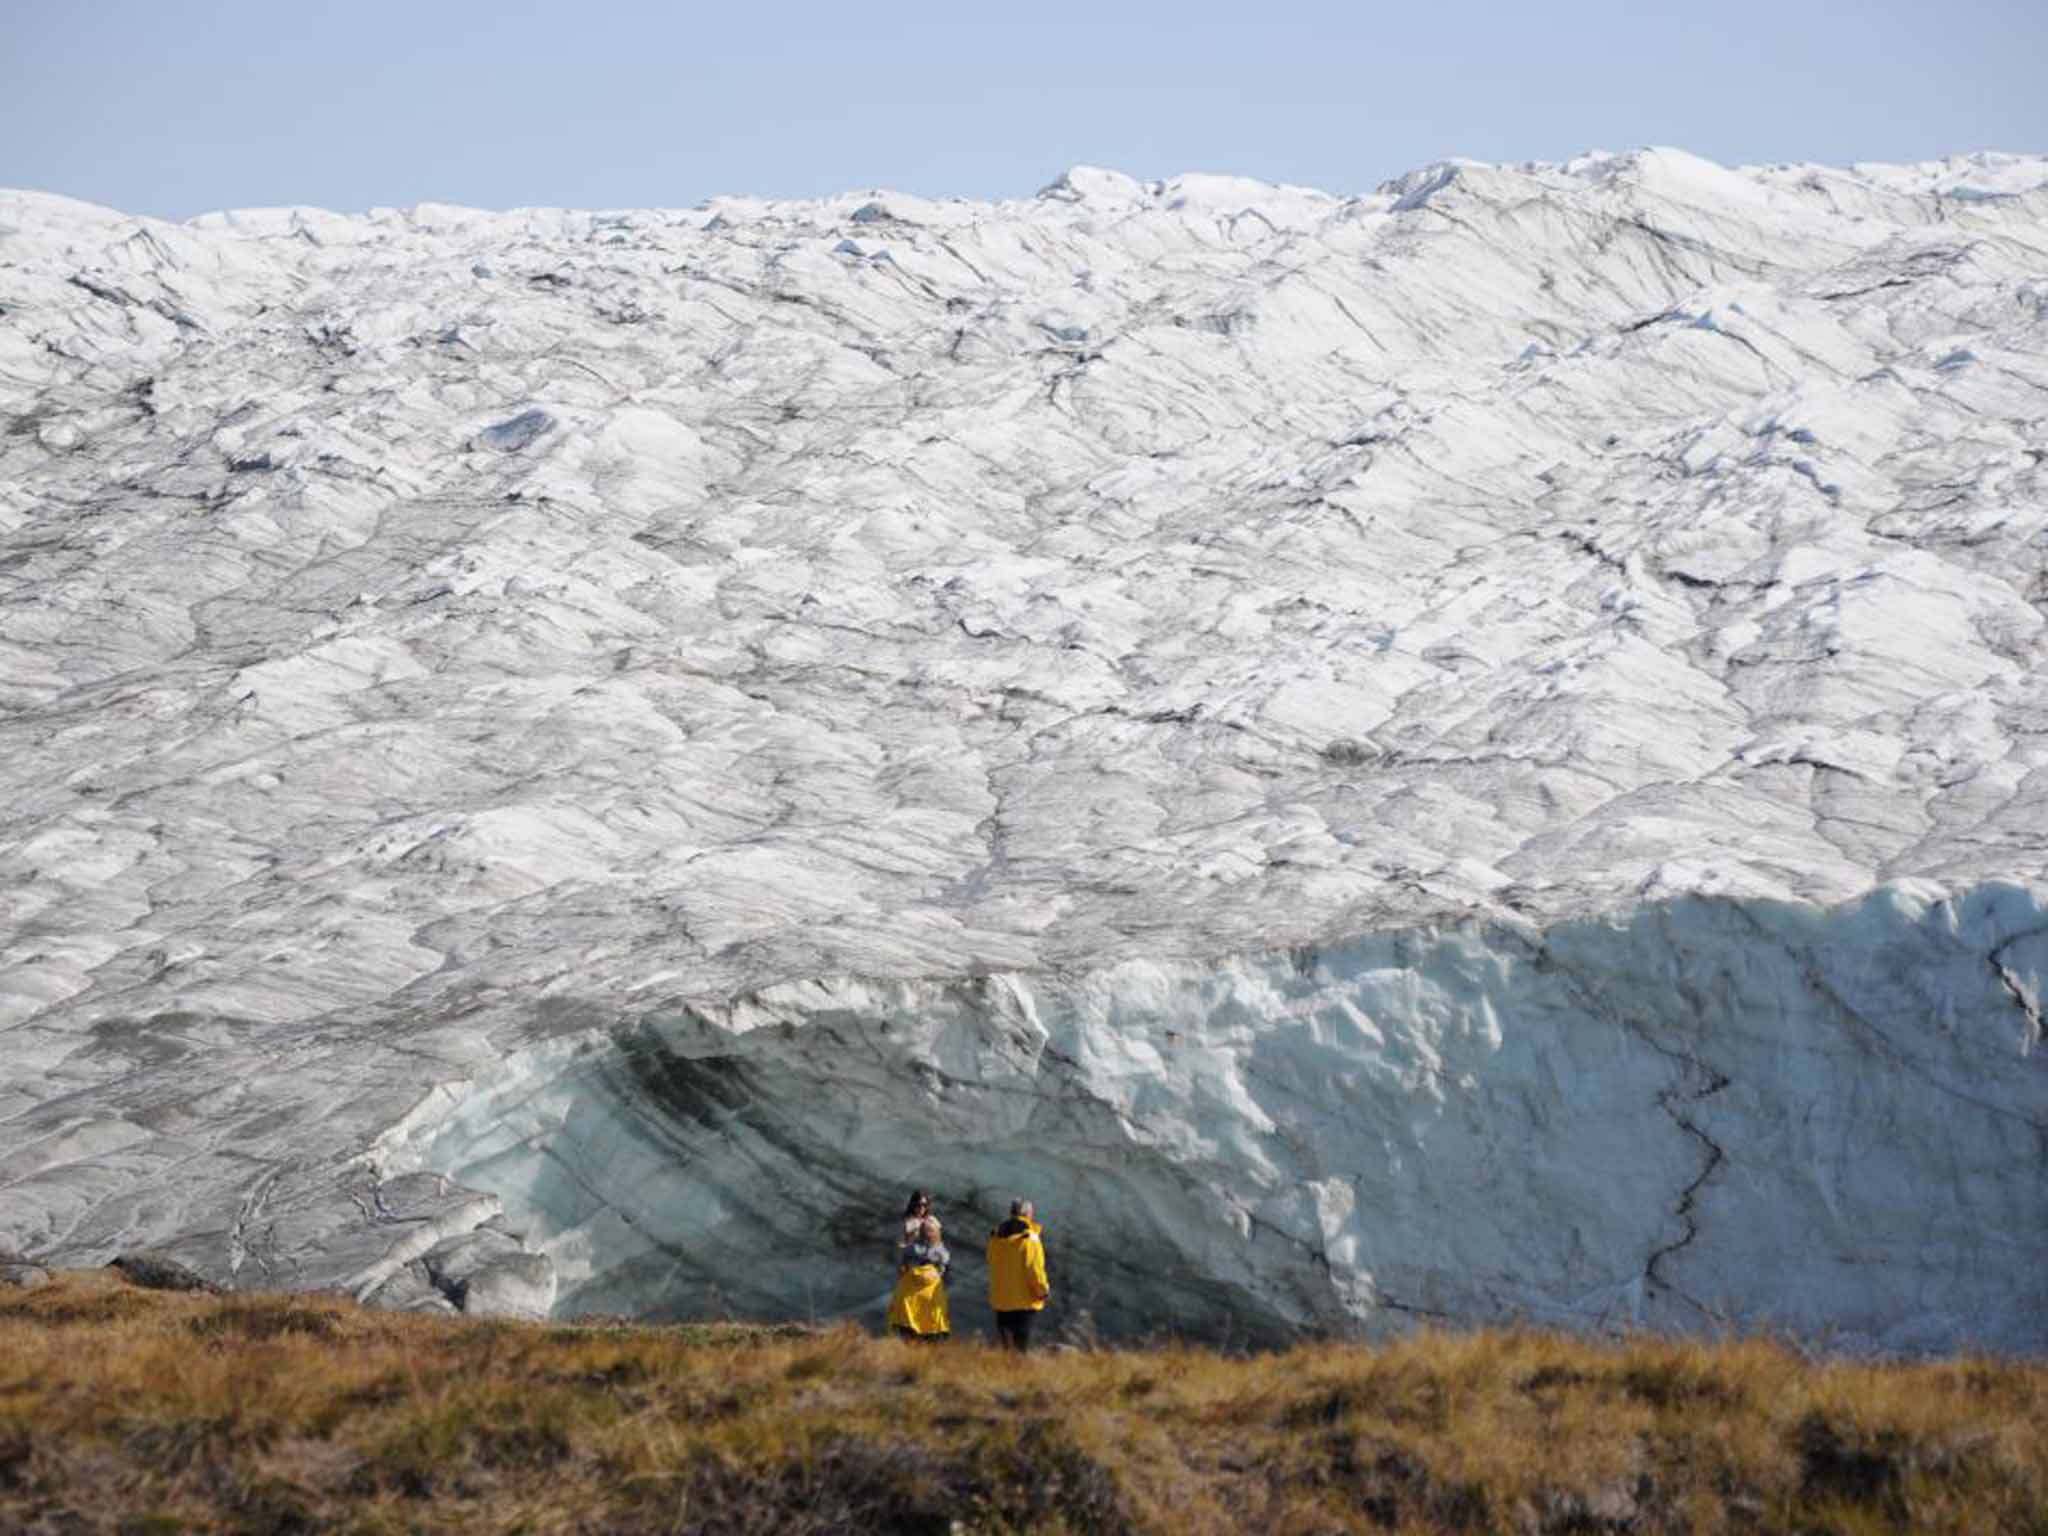 Great white: the Russell Glacier on the edge of Greenland's disappearing ice sheet